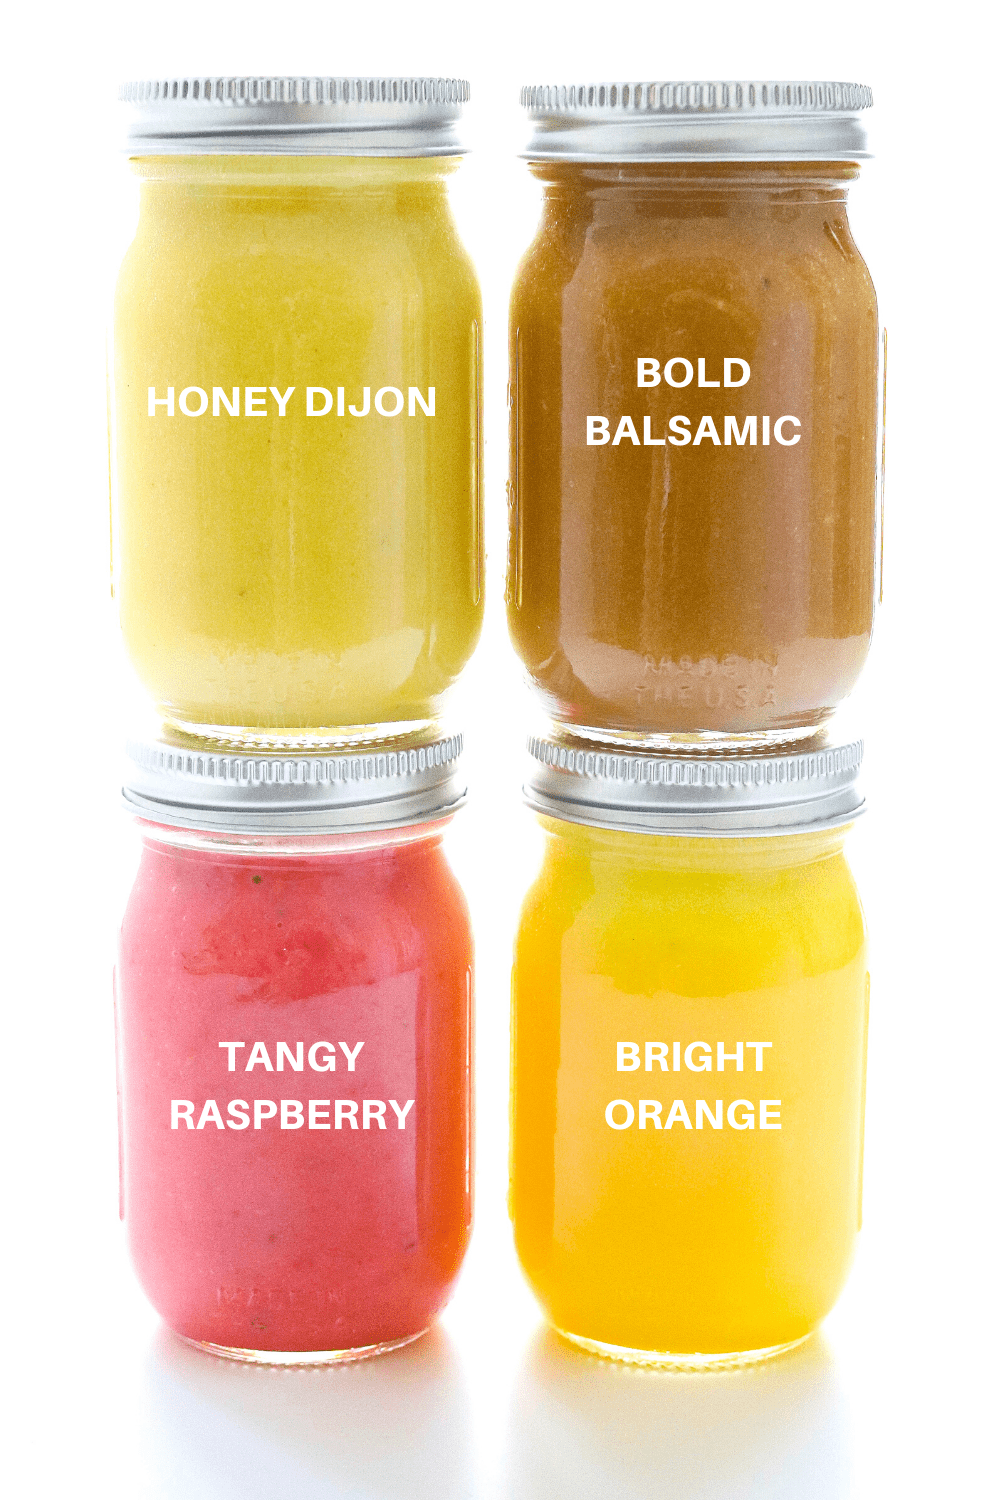 4 JARS OF COLORFUL SALAD DRESSING STACKED ON TOP OF ONE ANOTHER